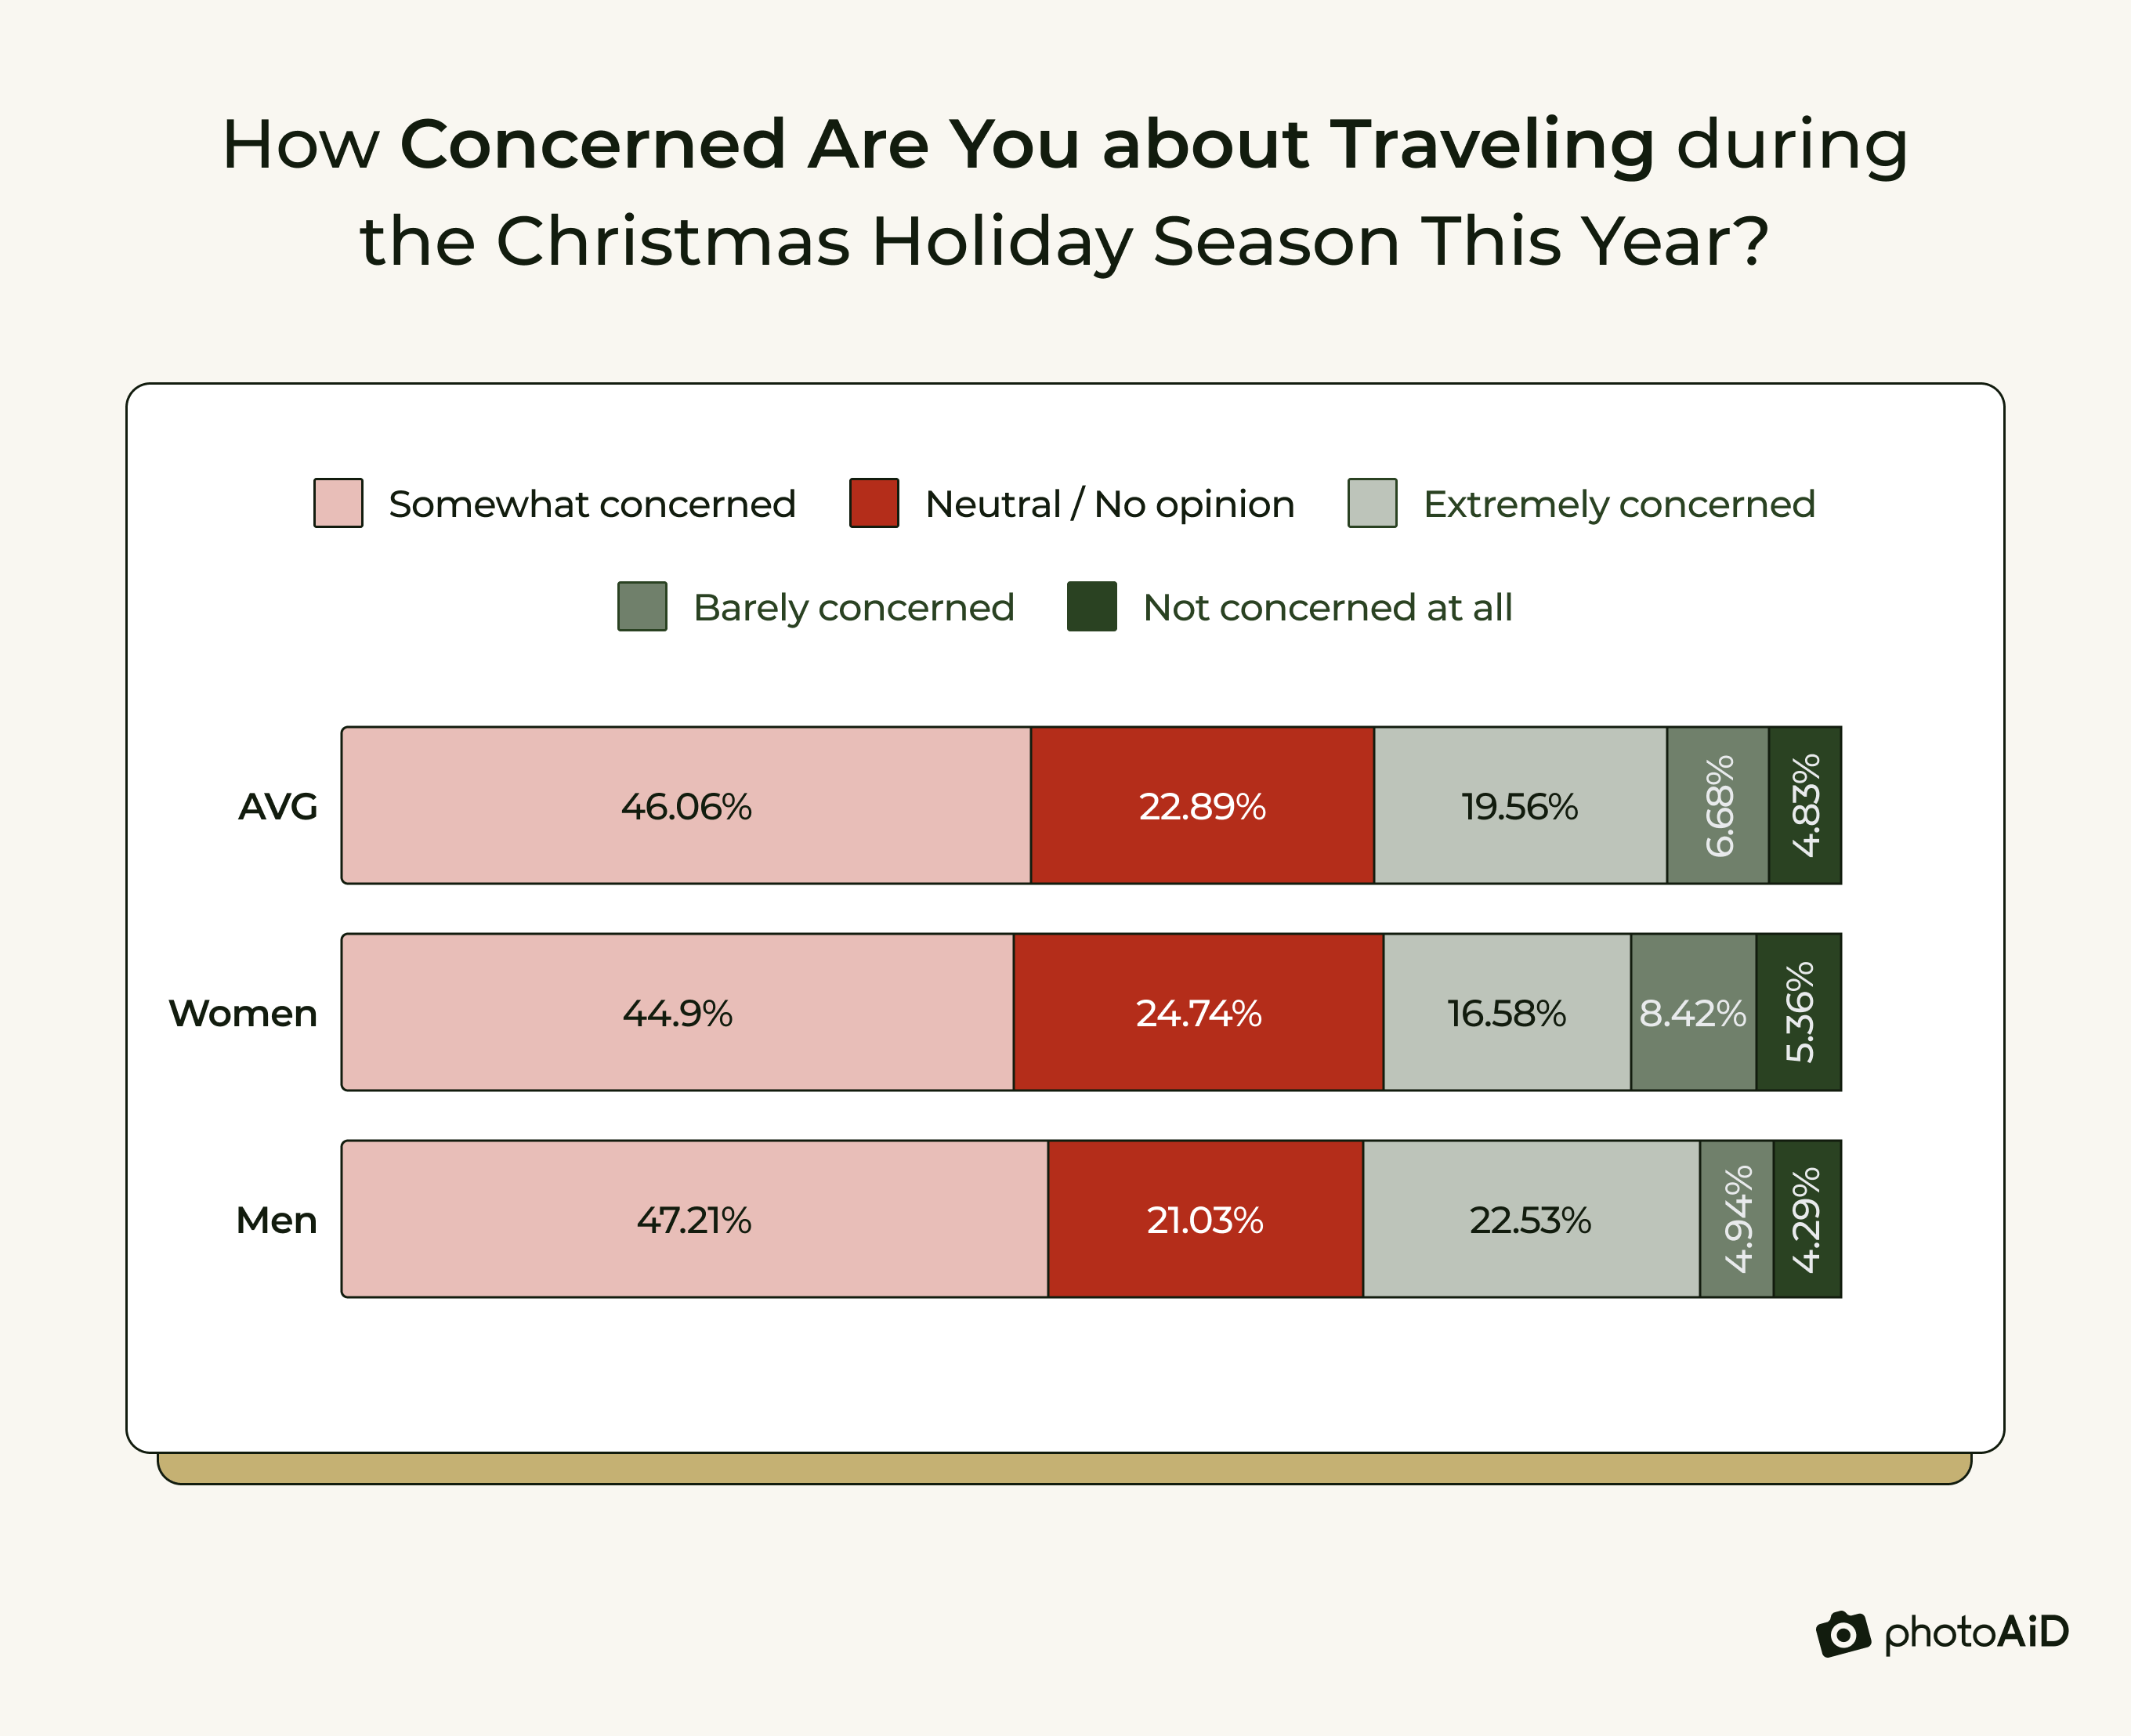 Levels of concern about Christmas travel among men and women, with a significant number being somewhat concerned